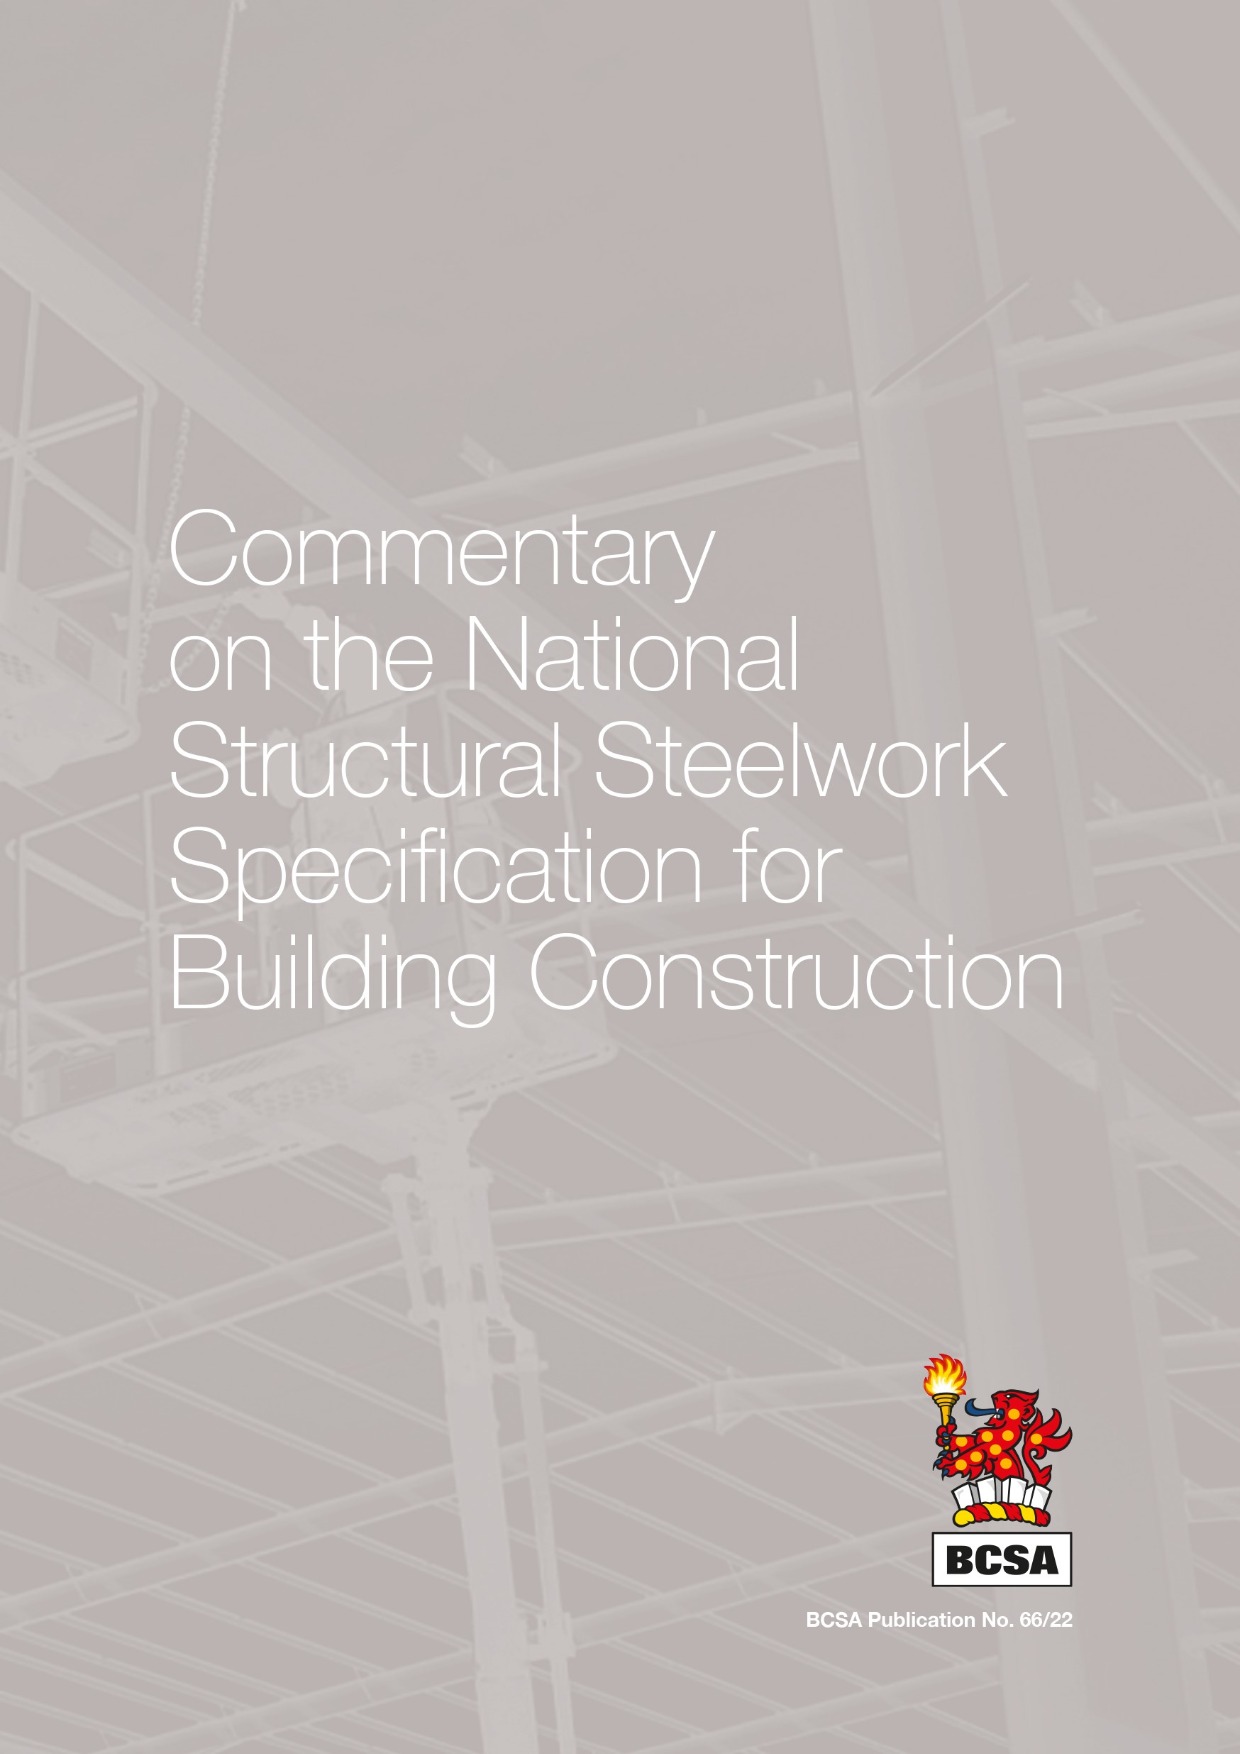 Commentary (3rd edition) on the National Structural Steelwork Specification for Building Construction 7th edition (Book)